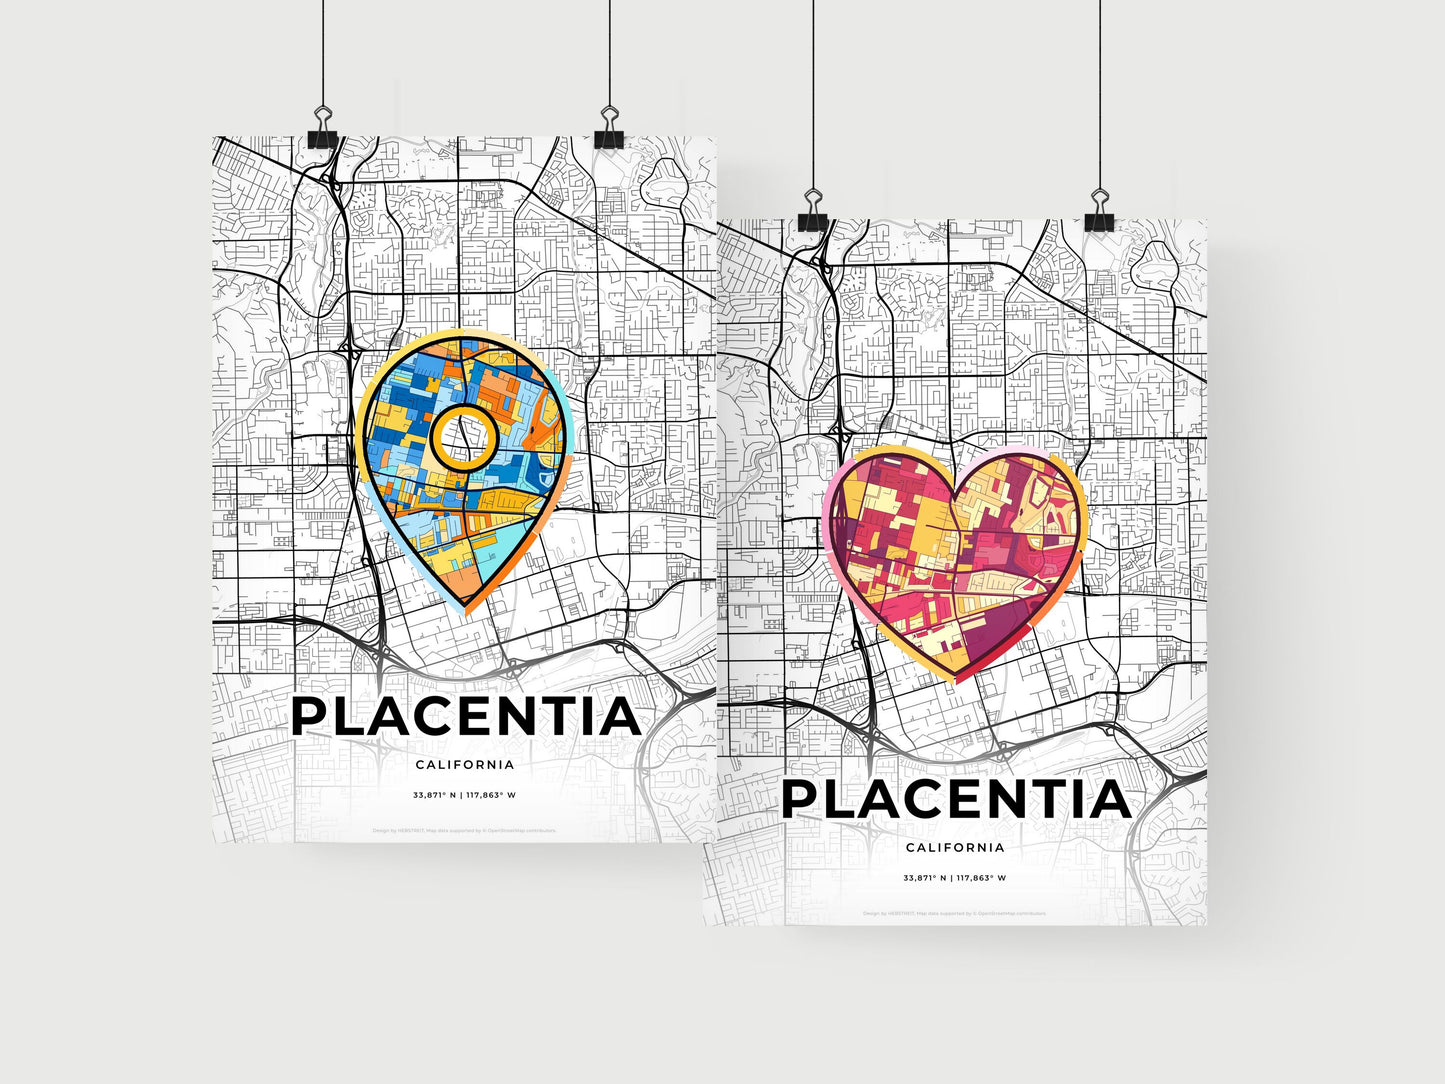 PLACENTIA CALIFORNIA minimal art map with a colorful icon.